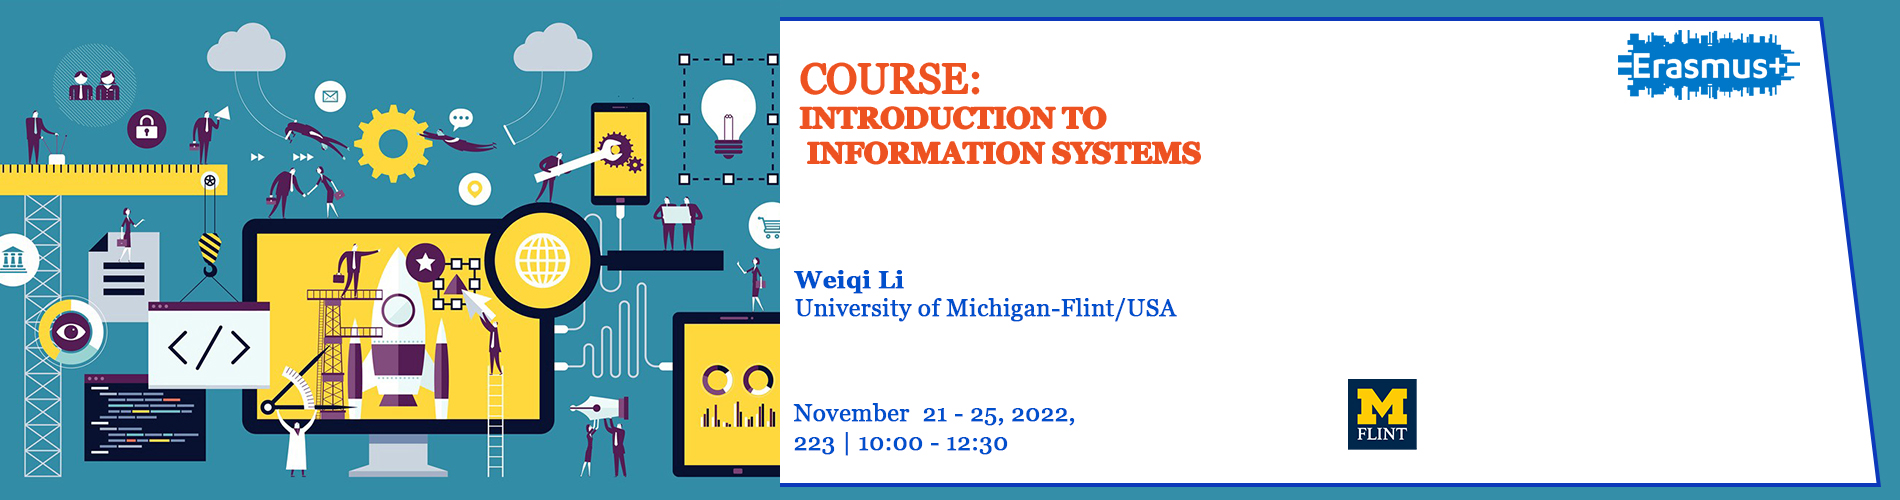 20221121-25_-_Introduction_to_Information_Systems